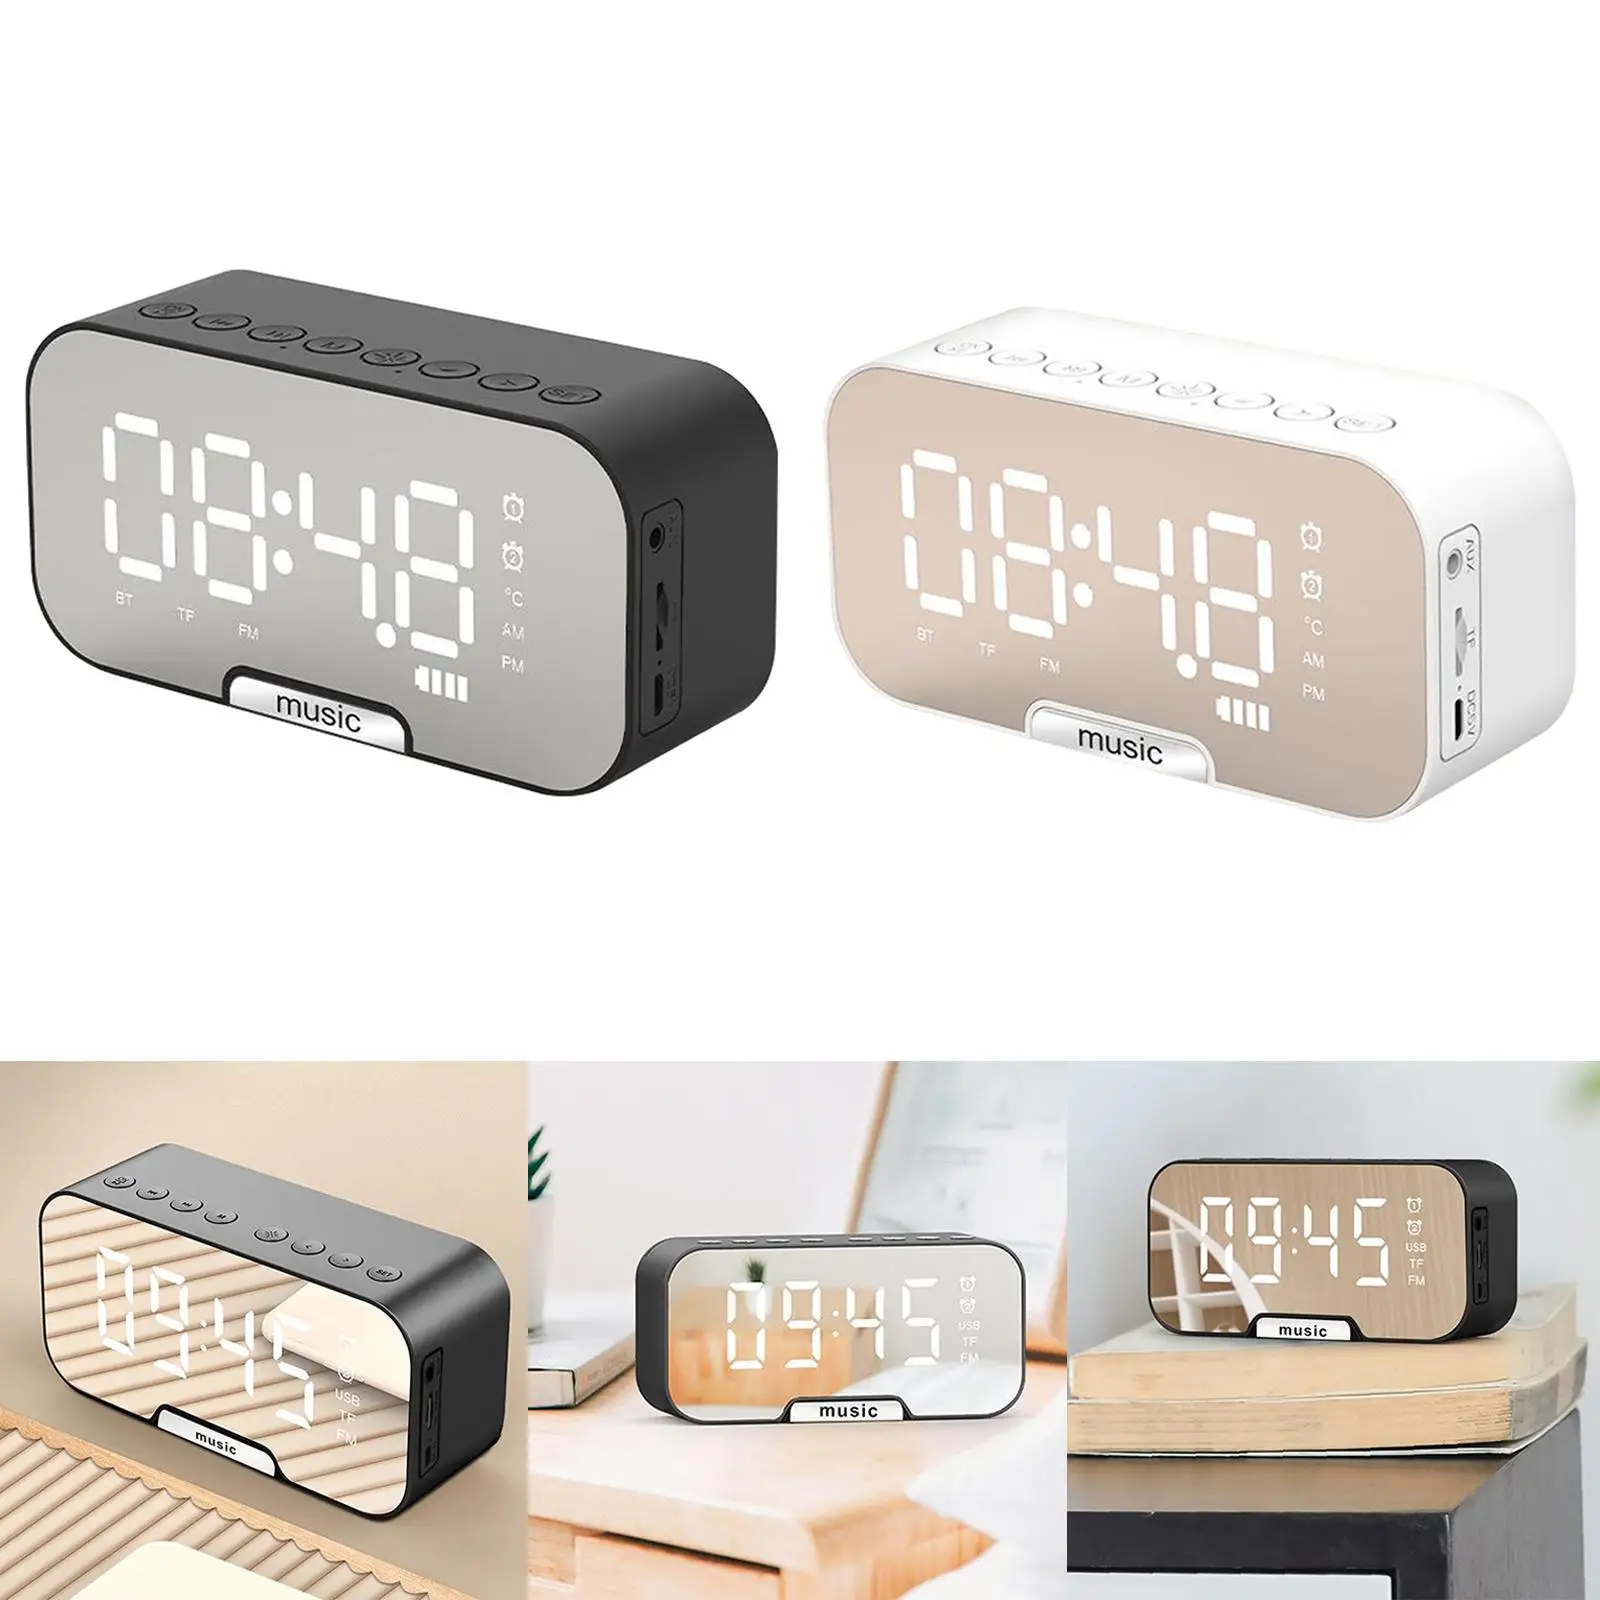 With Usb Charging Port, Adjustable Volume, Dimmable, Snooze